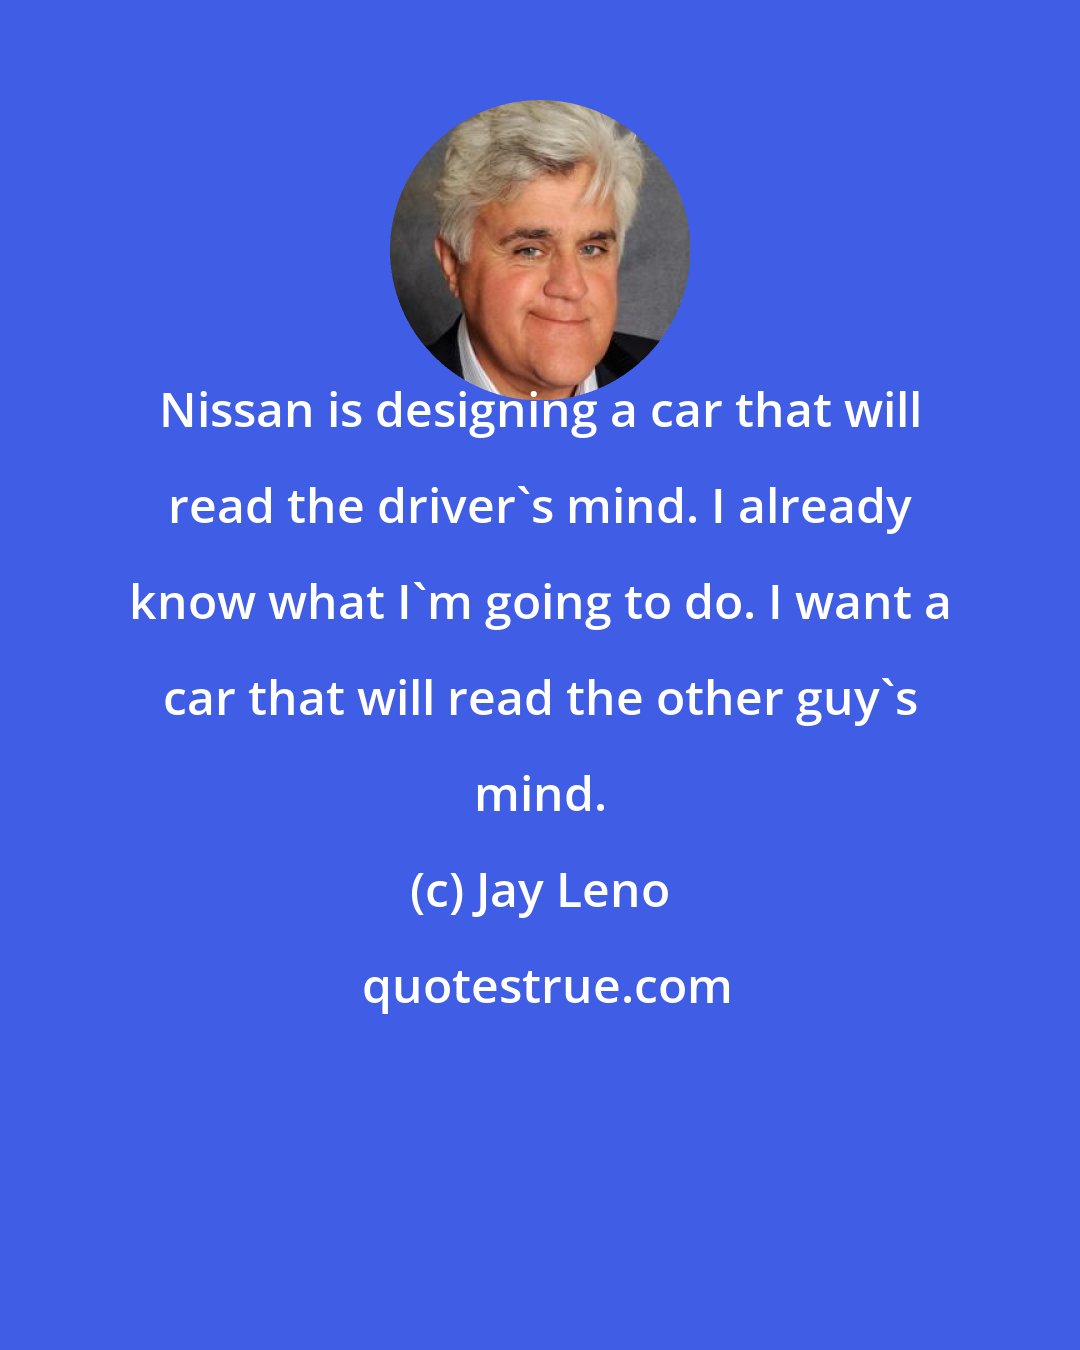 Jay Leno: Nissan is designing a car that will read the driver's mind. I already know what I'm going to do. I want a car that will read the other guy's mind.